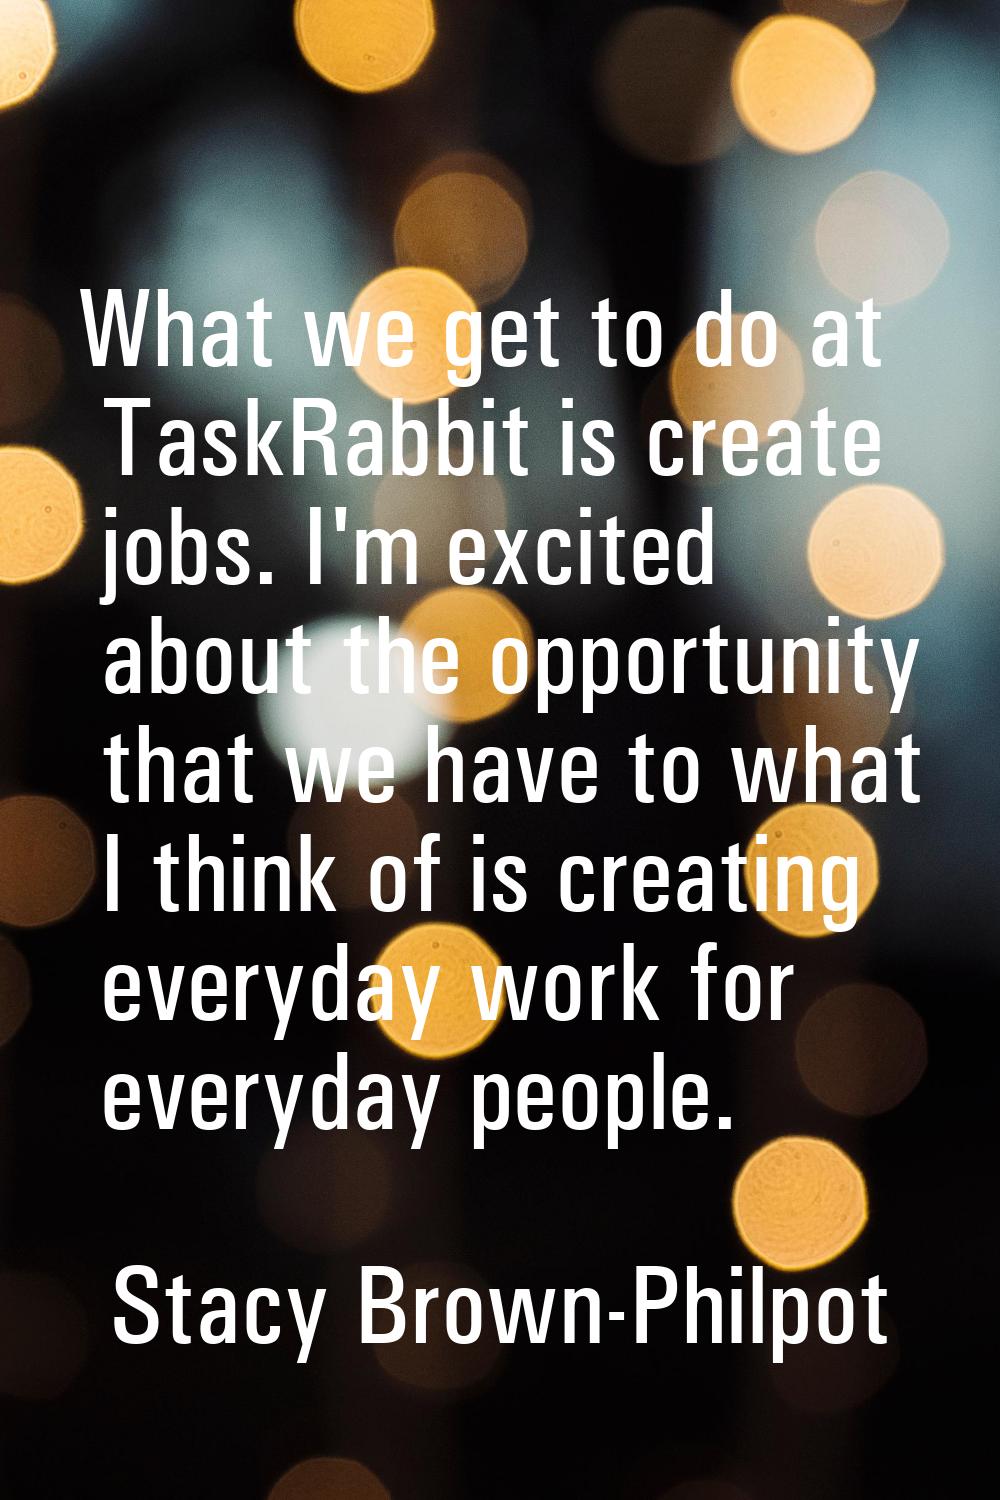 What we get to do at TaskRabbit is create jobs. I'm excited about the opportunity that we have to w